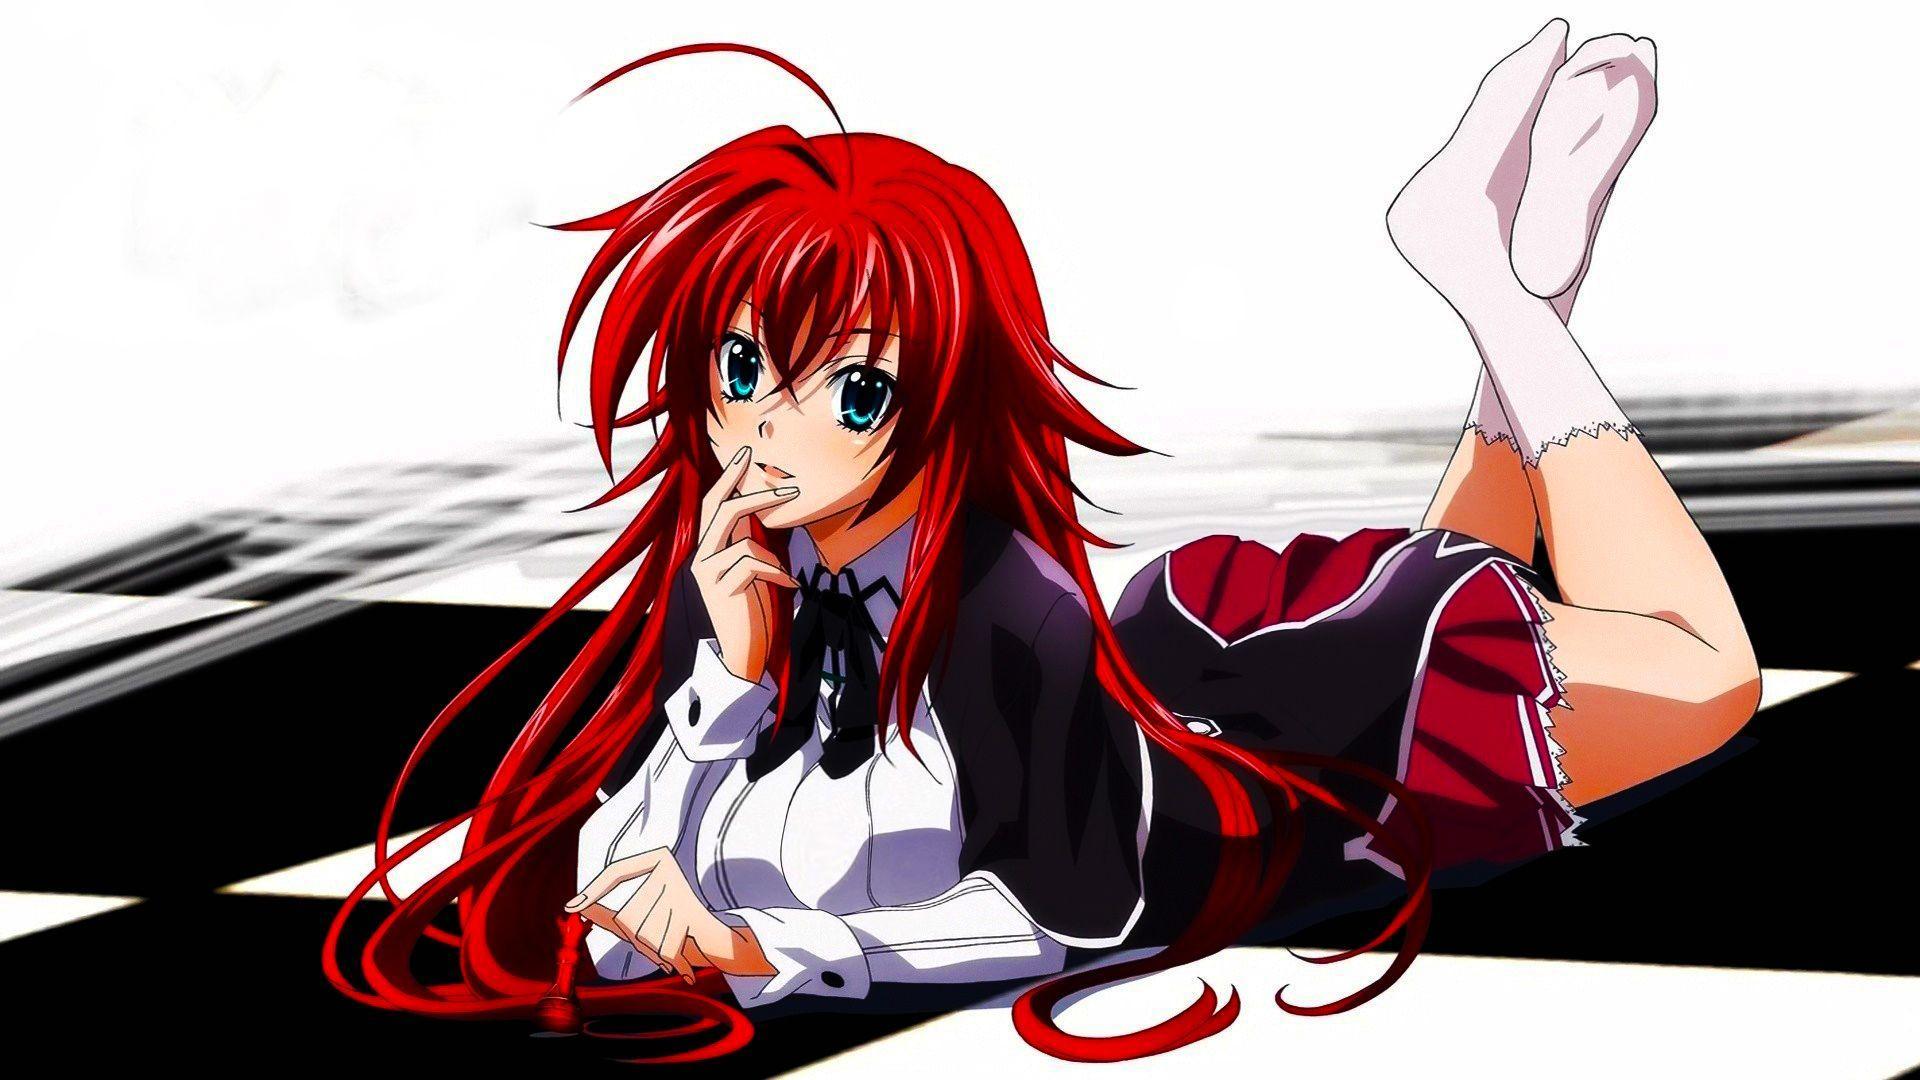 High School DxD Wallpapers - Wallpaper Cave